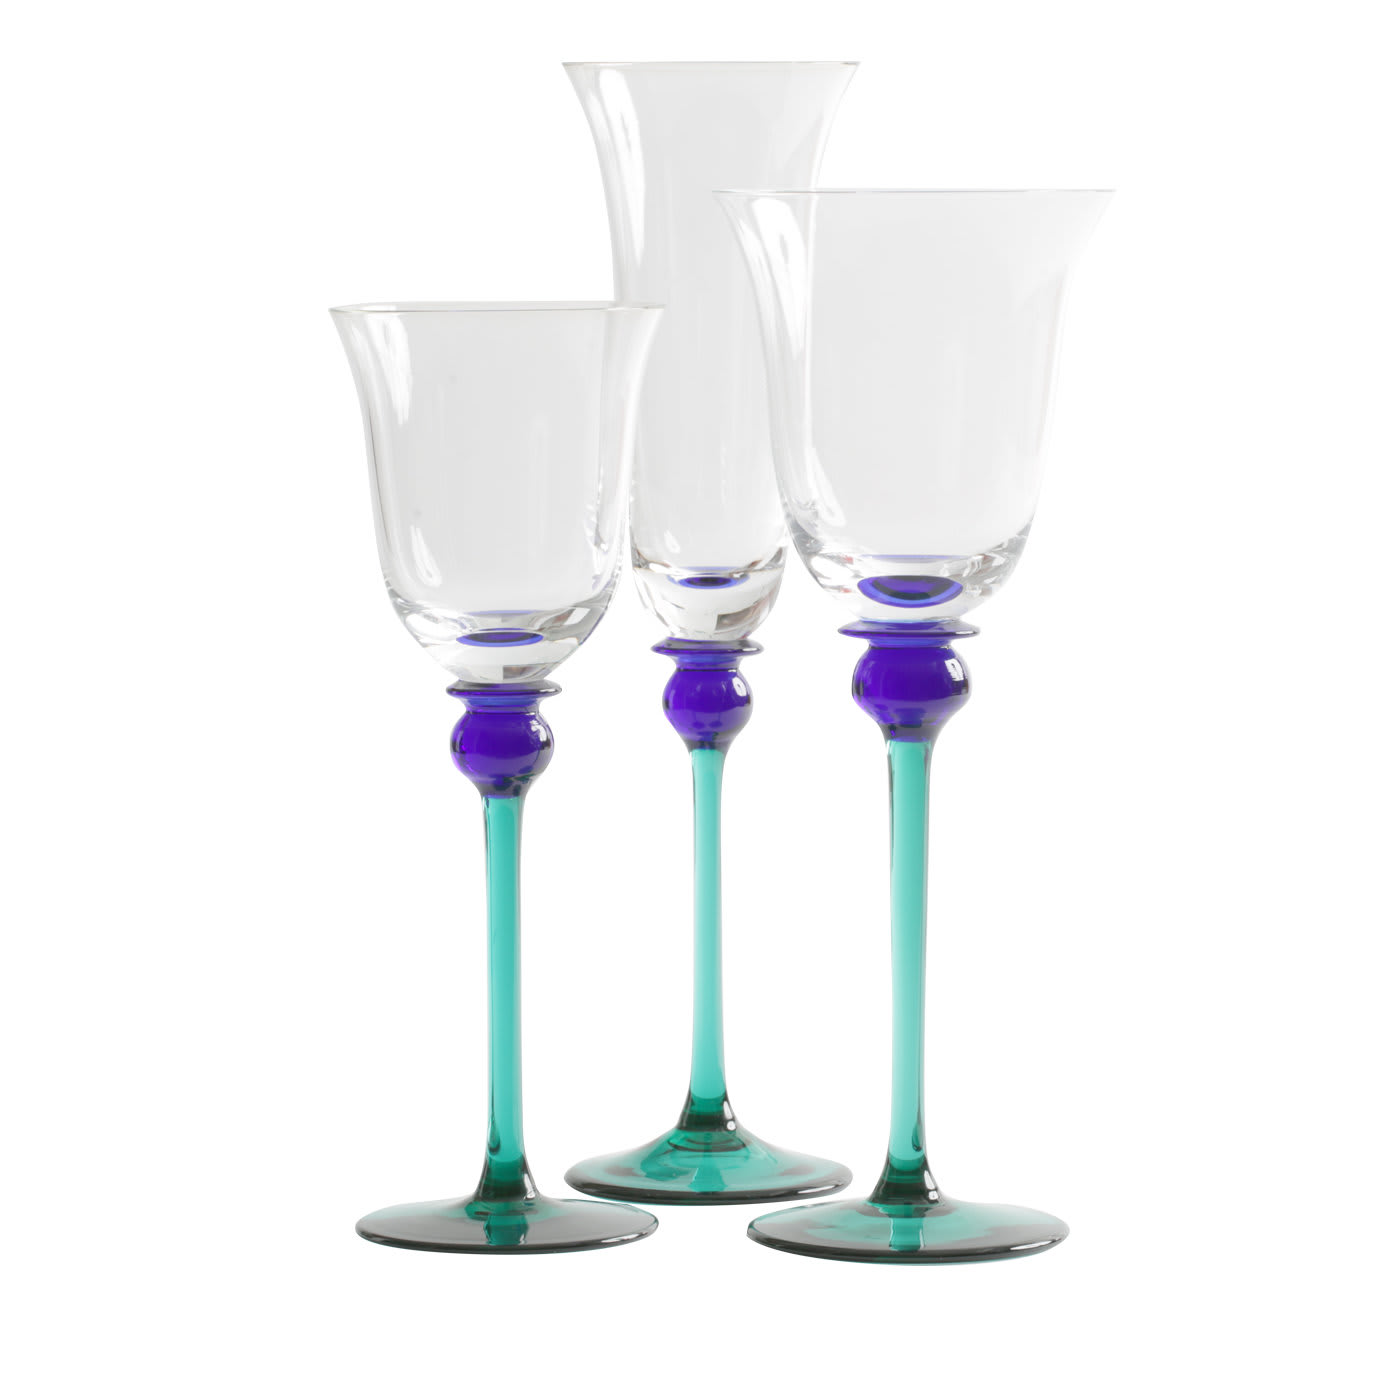 Mazzorbo Set of 3 Glasses For Two - Fornace Mian